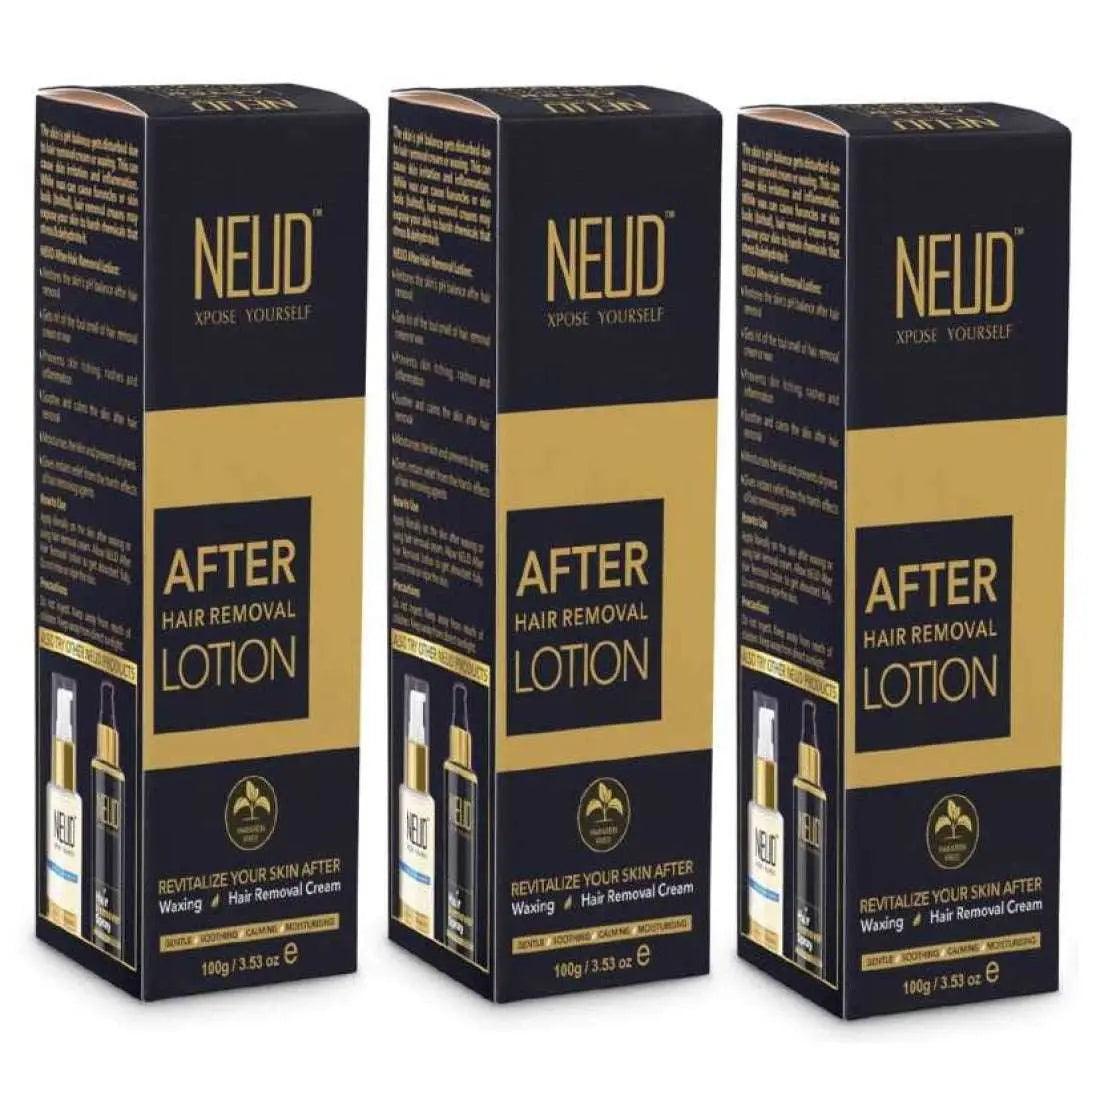 NEUD After-Hair-Removal Lotion for Skin Care in Men & Women - 100g 8903540011609